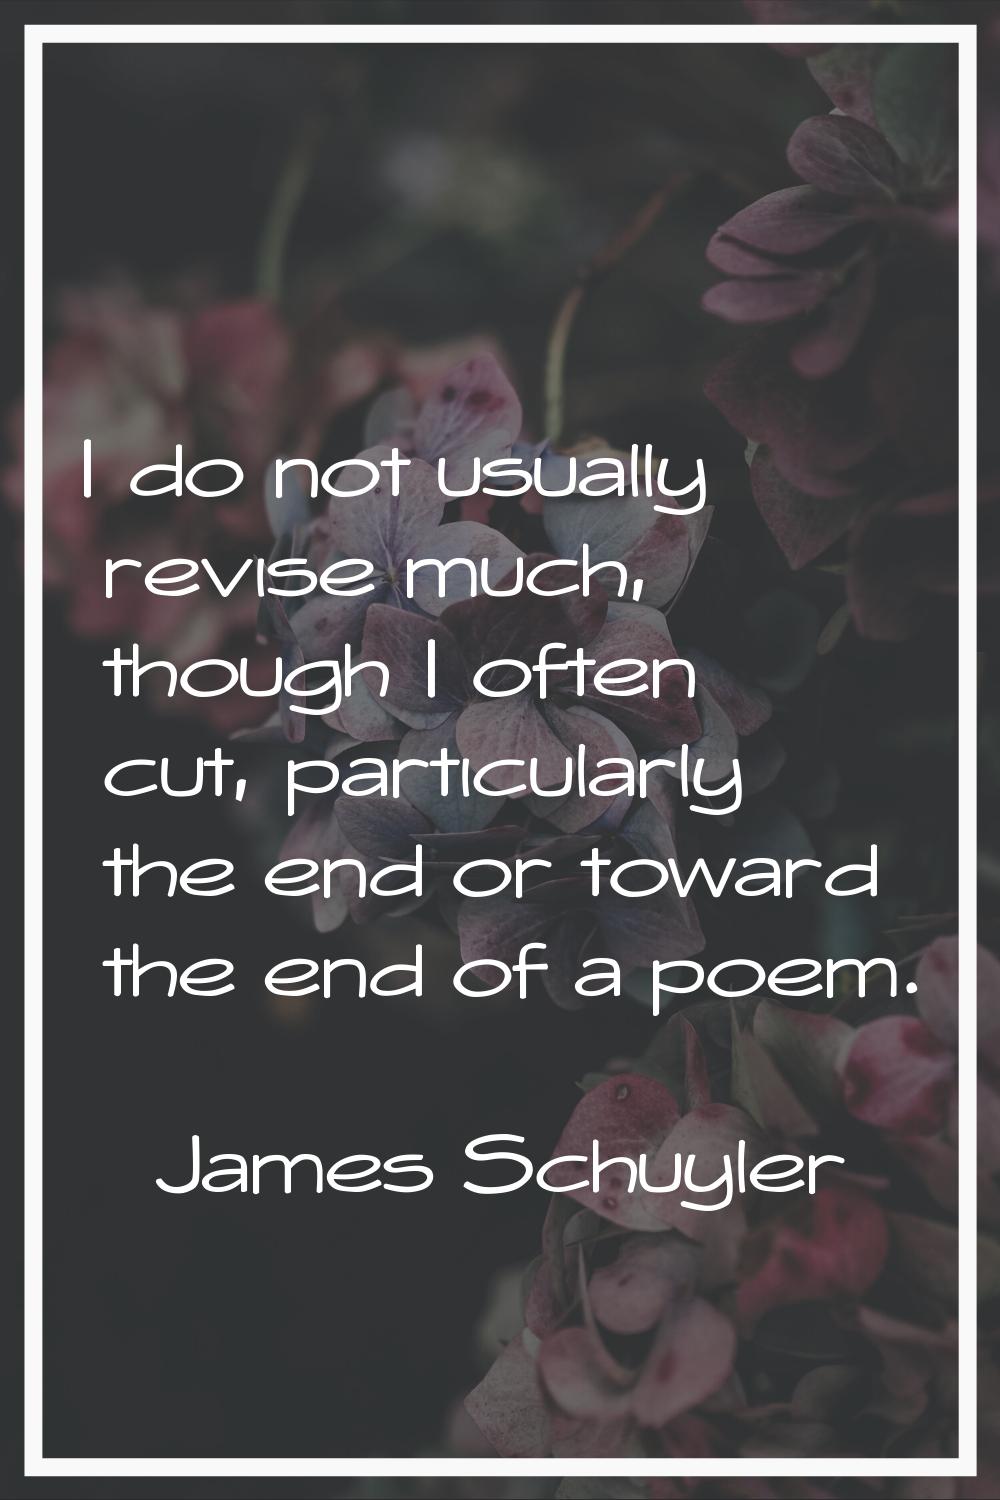 I do not usually revise much, though I often cut, particularly the end or toward the end of a poem.